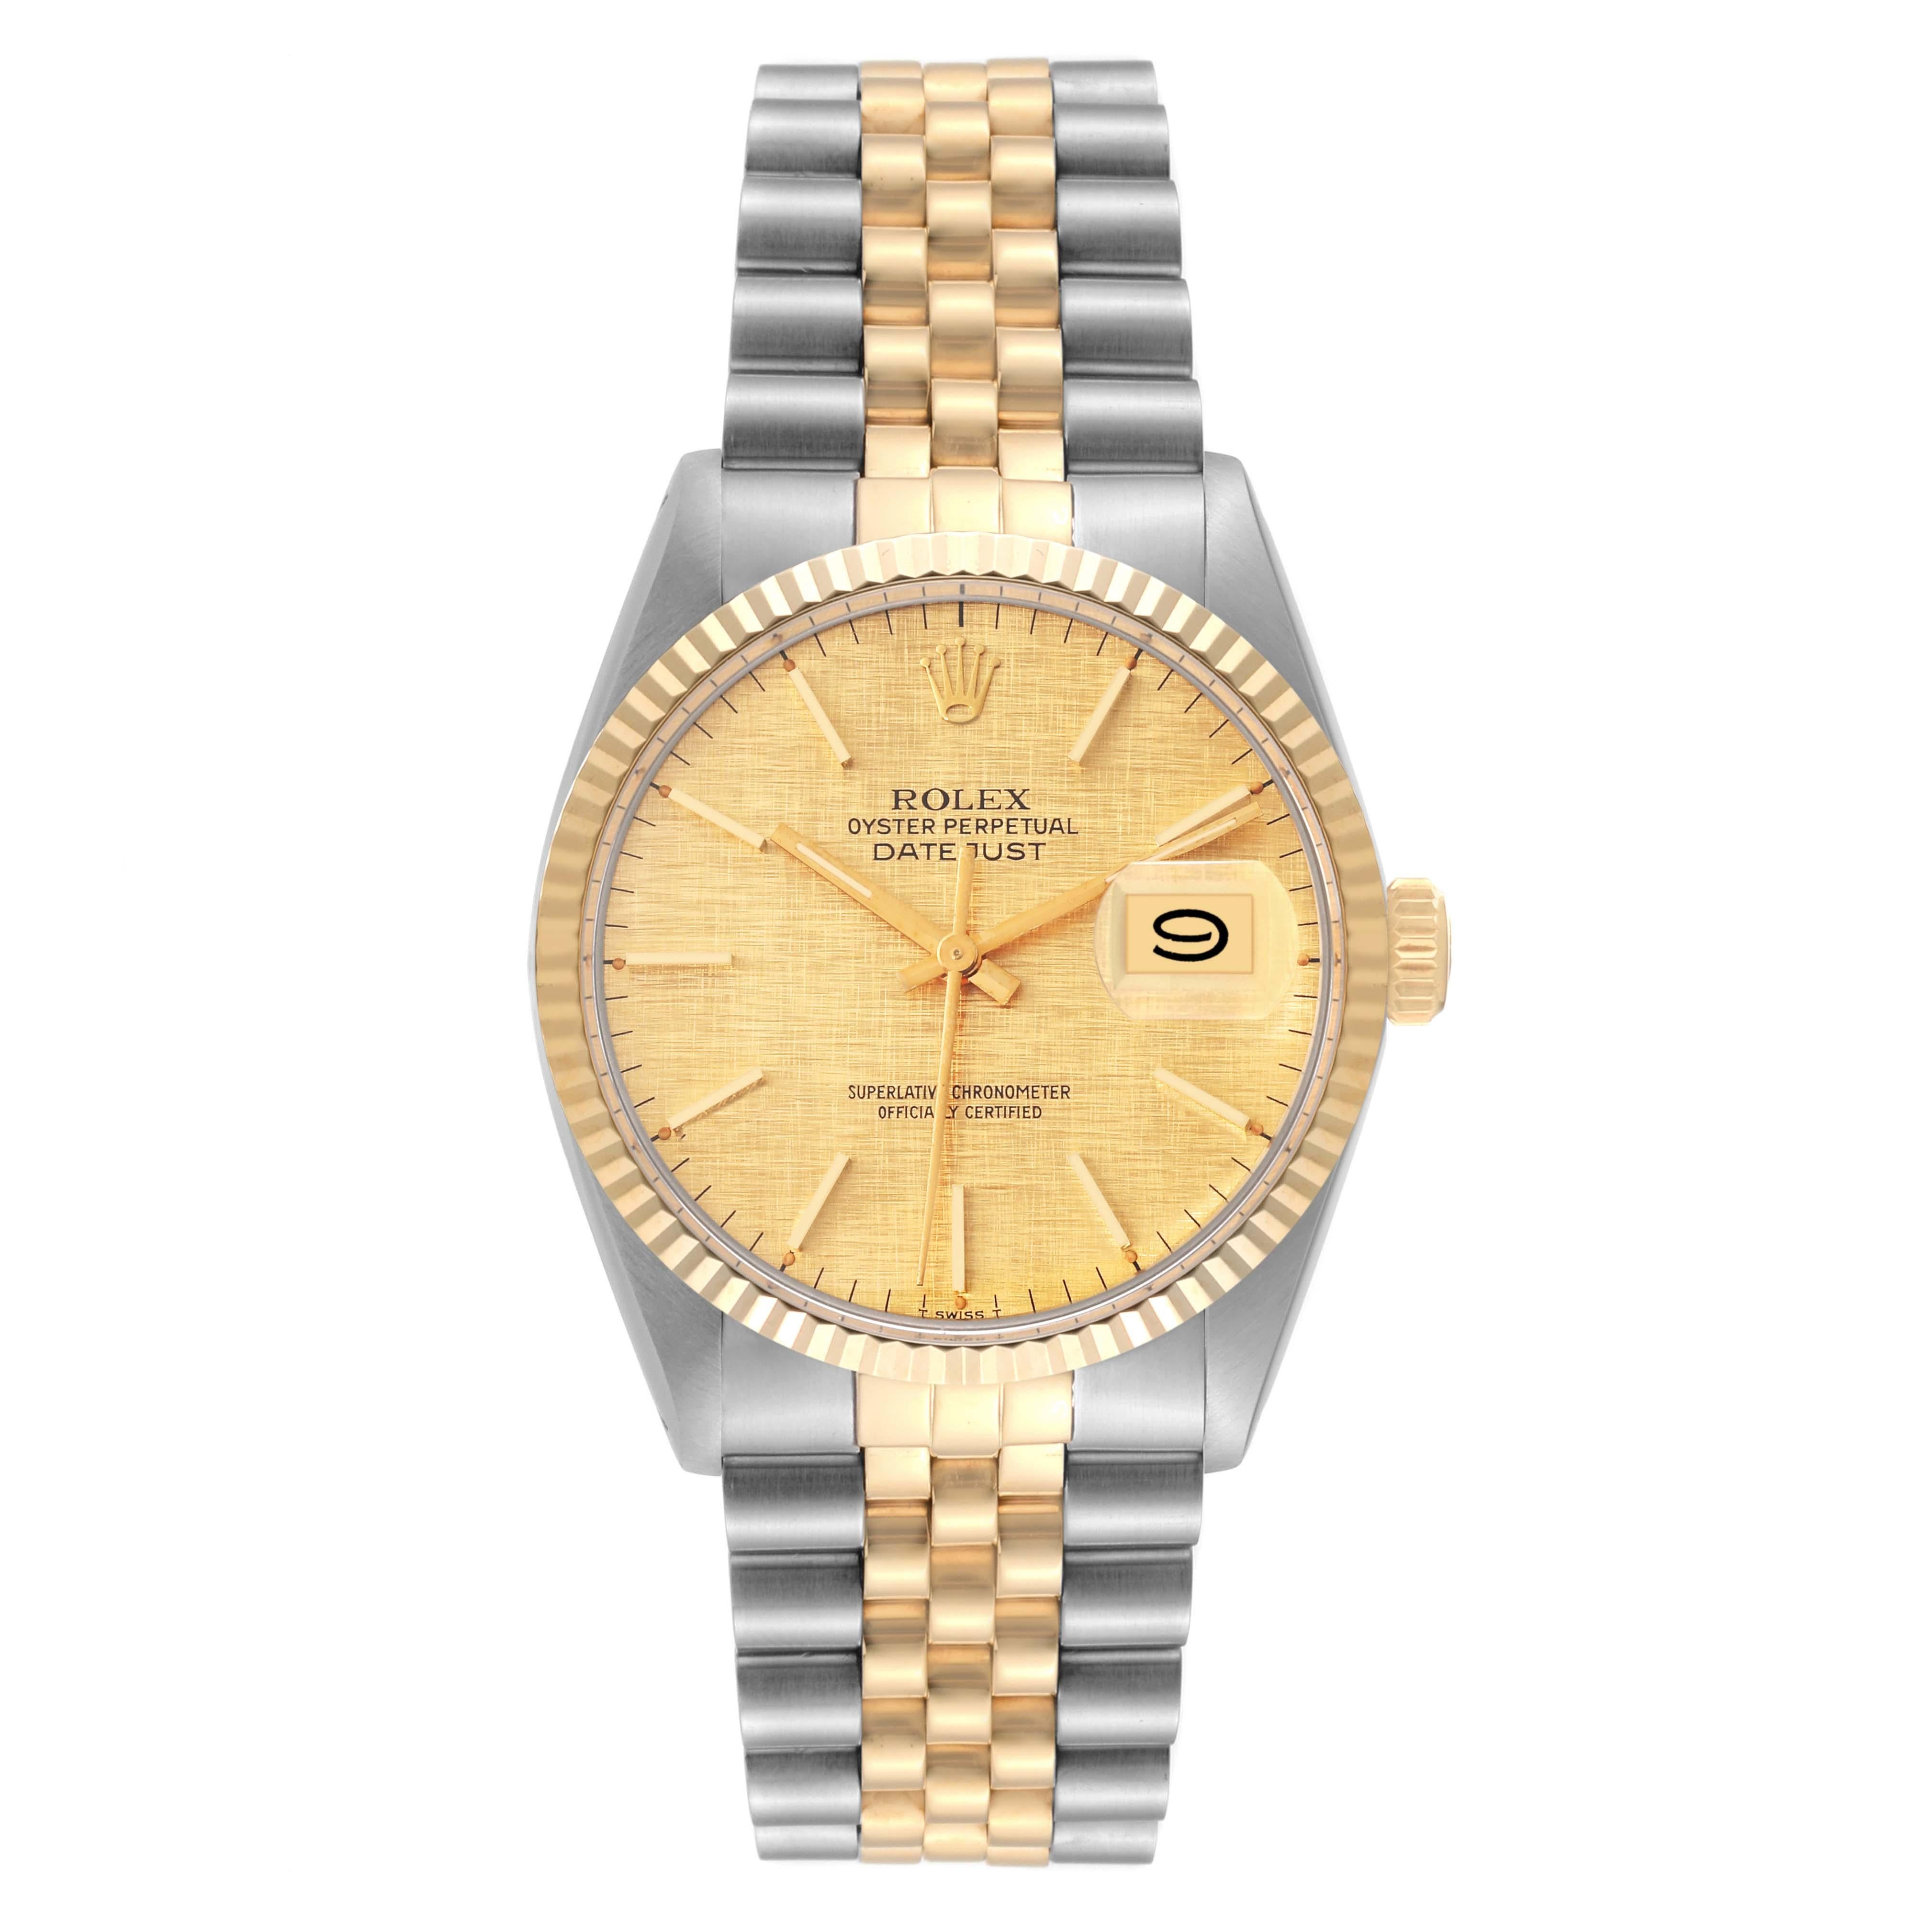 Rolex Datejust Steel Yellow Gold Linen Dial Vintage Mens Watch 16013. Officially certified chronometer automatic self-winding movement. Stainless steel and 18K yellow gold oyster case 36.0 mm in diameter. Rolex logo on an 18k yellow gold crown. 18k